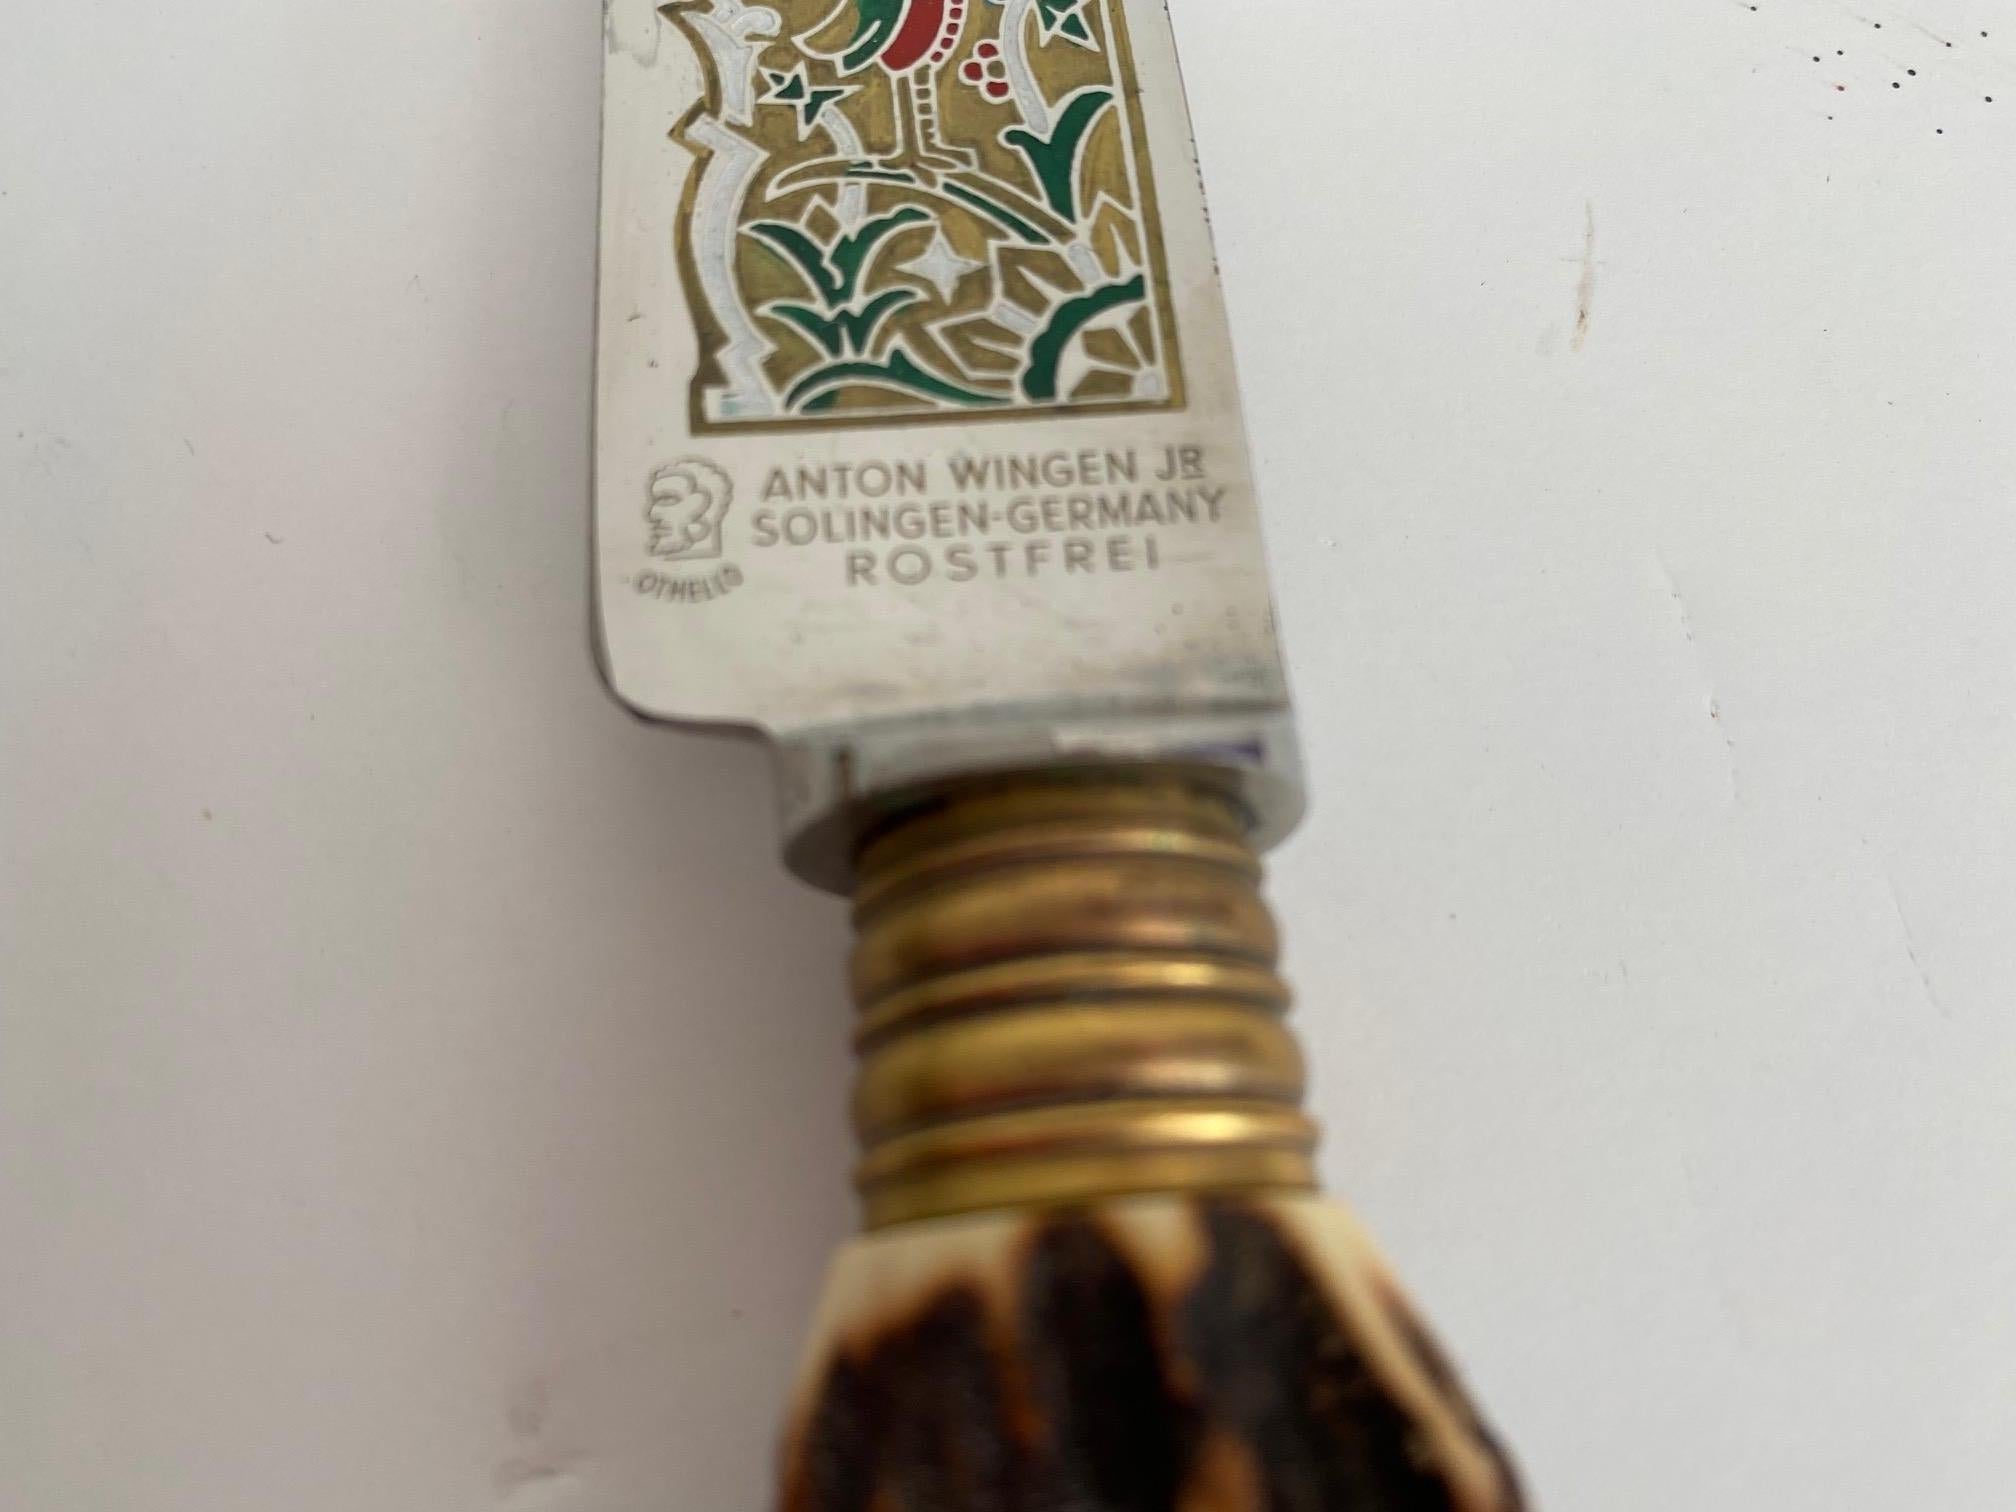 This is a vintage/antique German Anton Wingen Jr. Solingen cutlery and carving set. This unique meat carving set is made of stainless steel and stag antler handles. The stainless steel is etched and hand-painted with a bird and crop scenes.